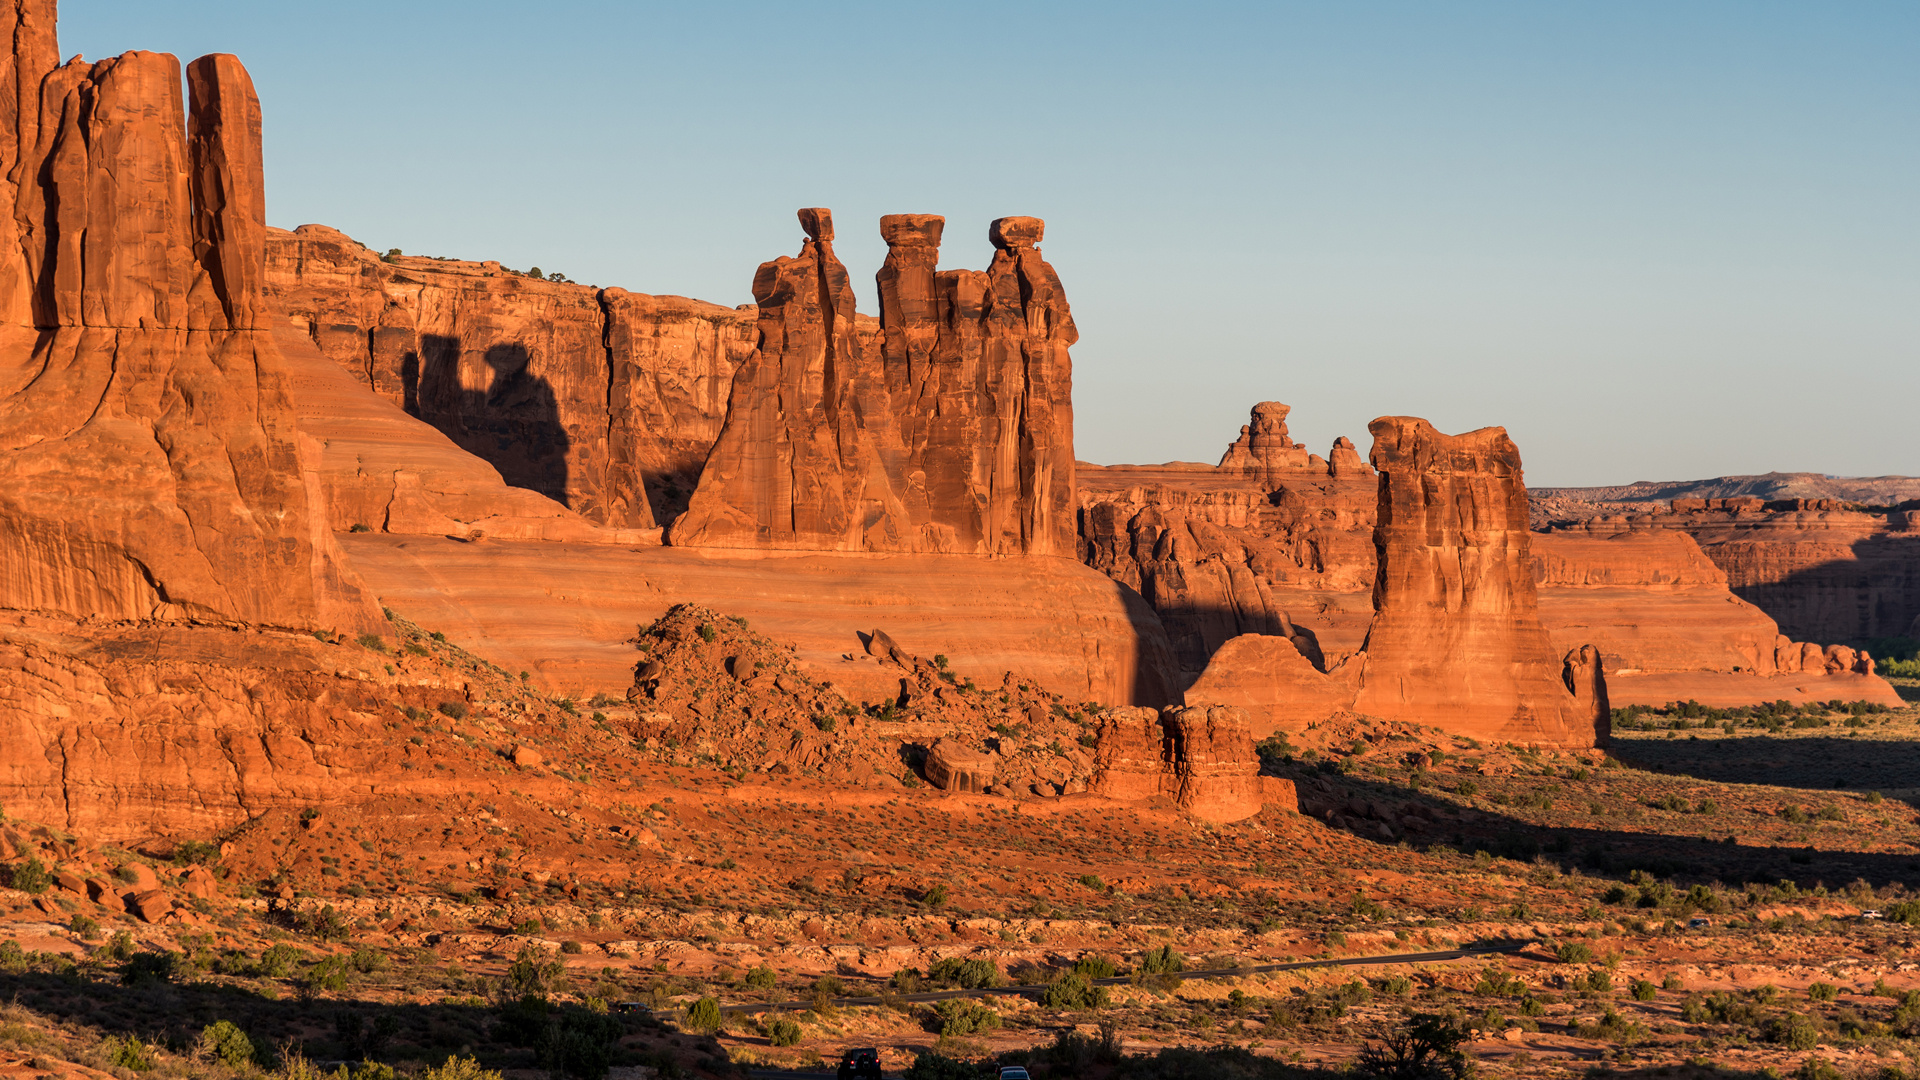 The Three Gossips (Arches National Park)